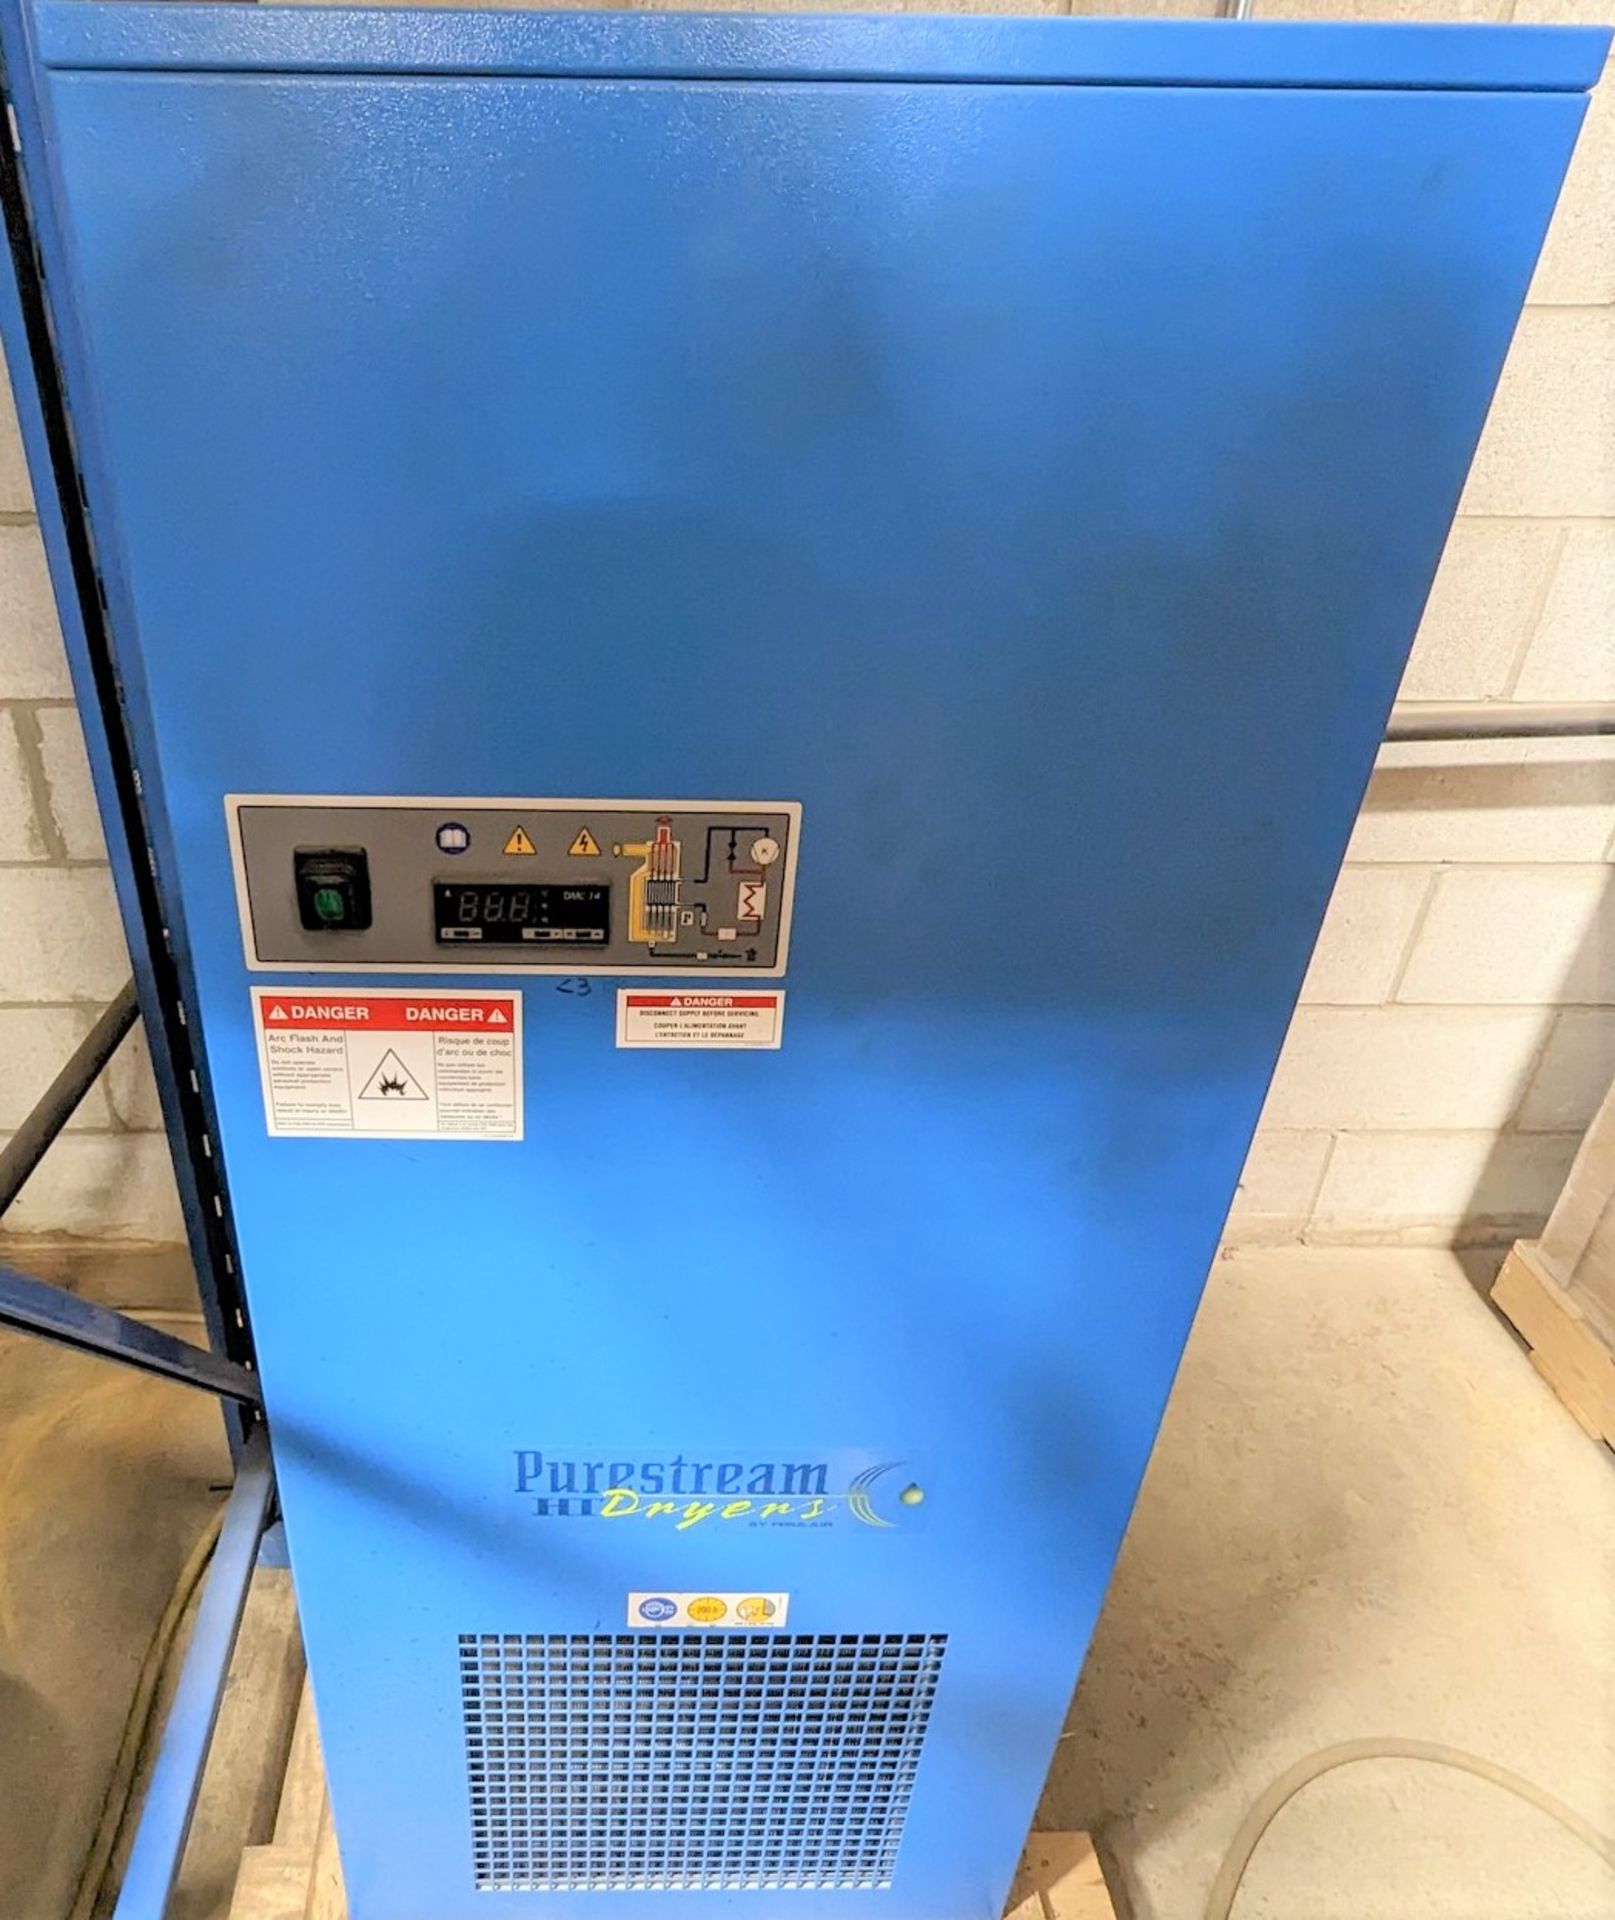 2017 PURESTREAM AHT100-UP AIR DRYER, S/N 17R028830 - Image 2 of 4